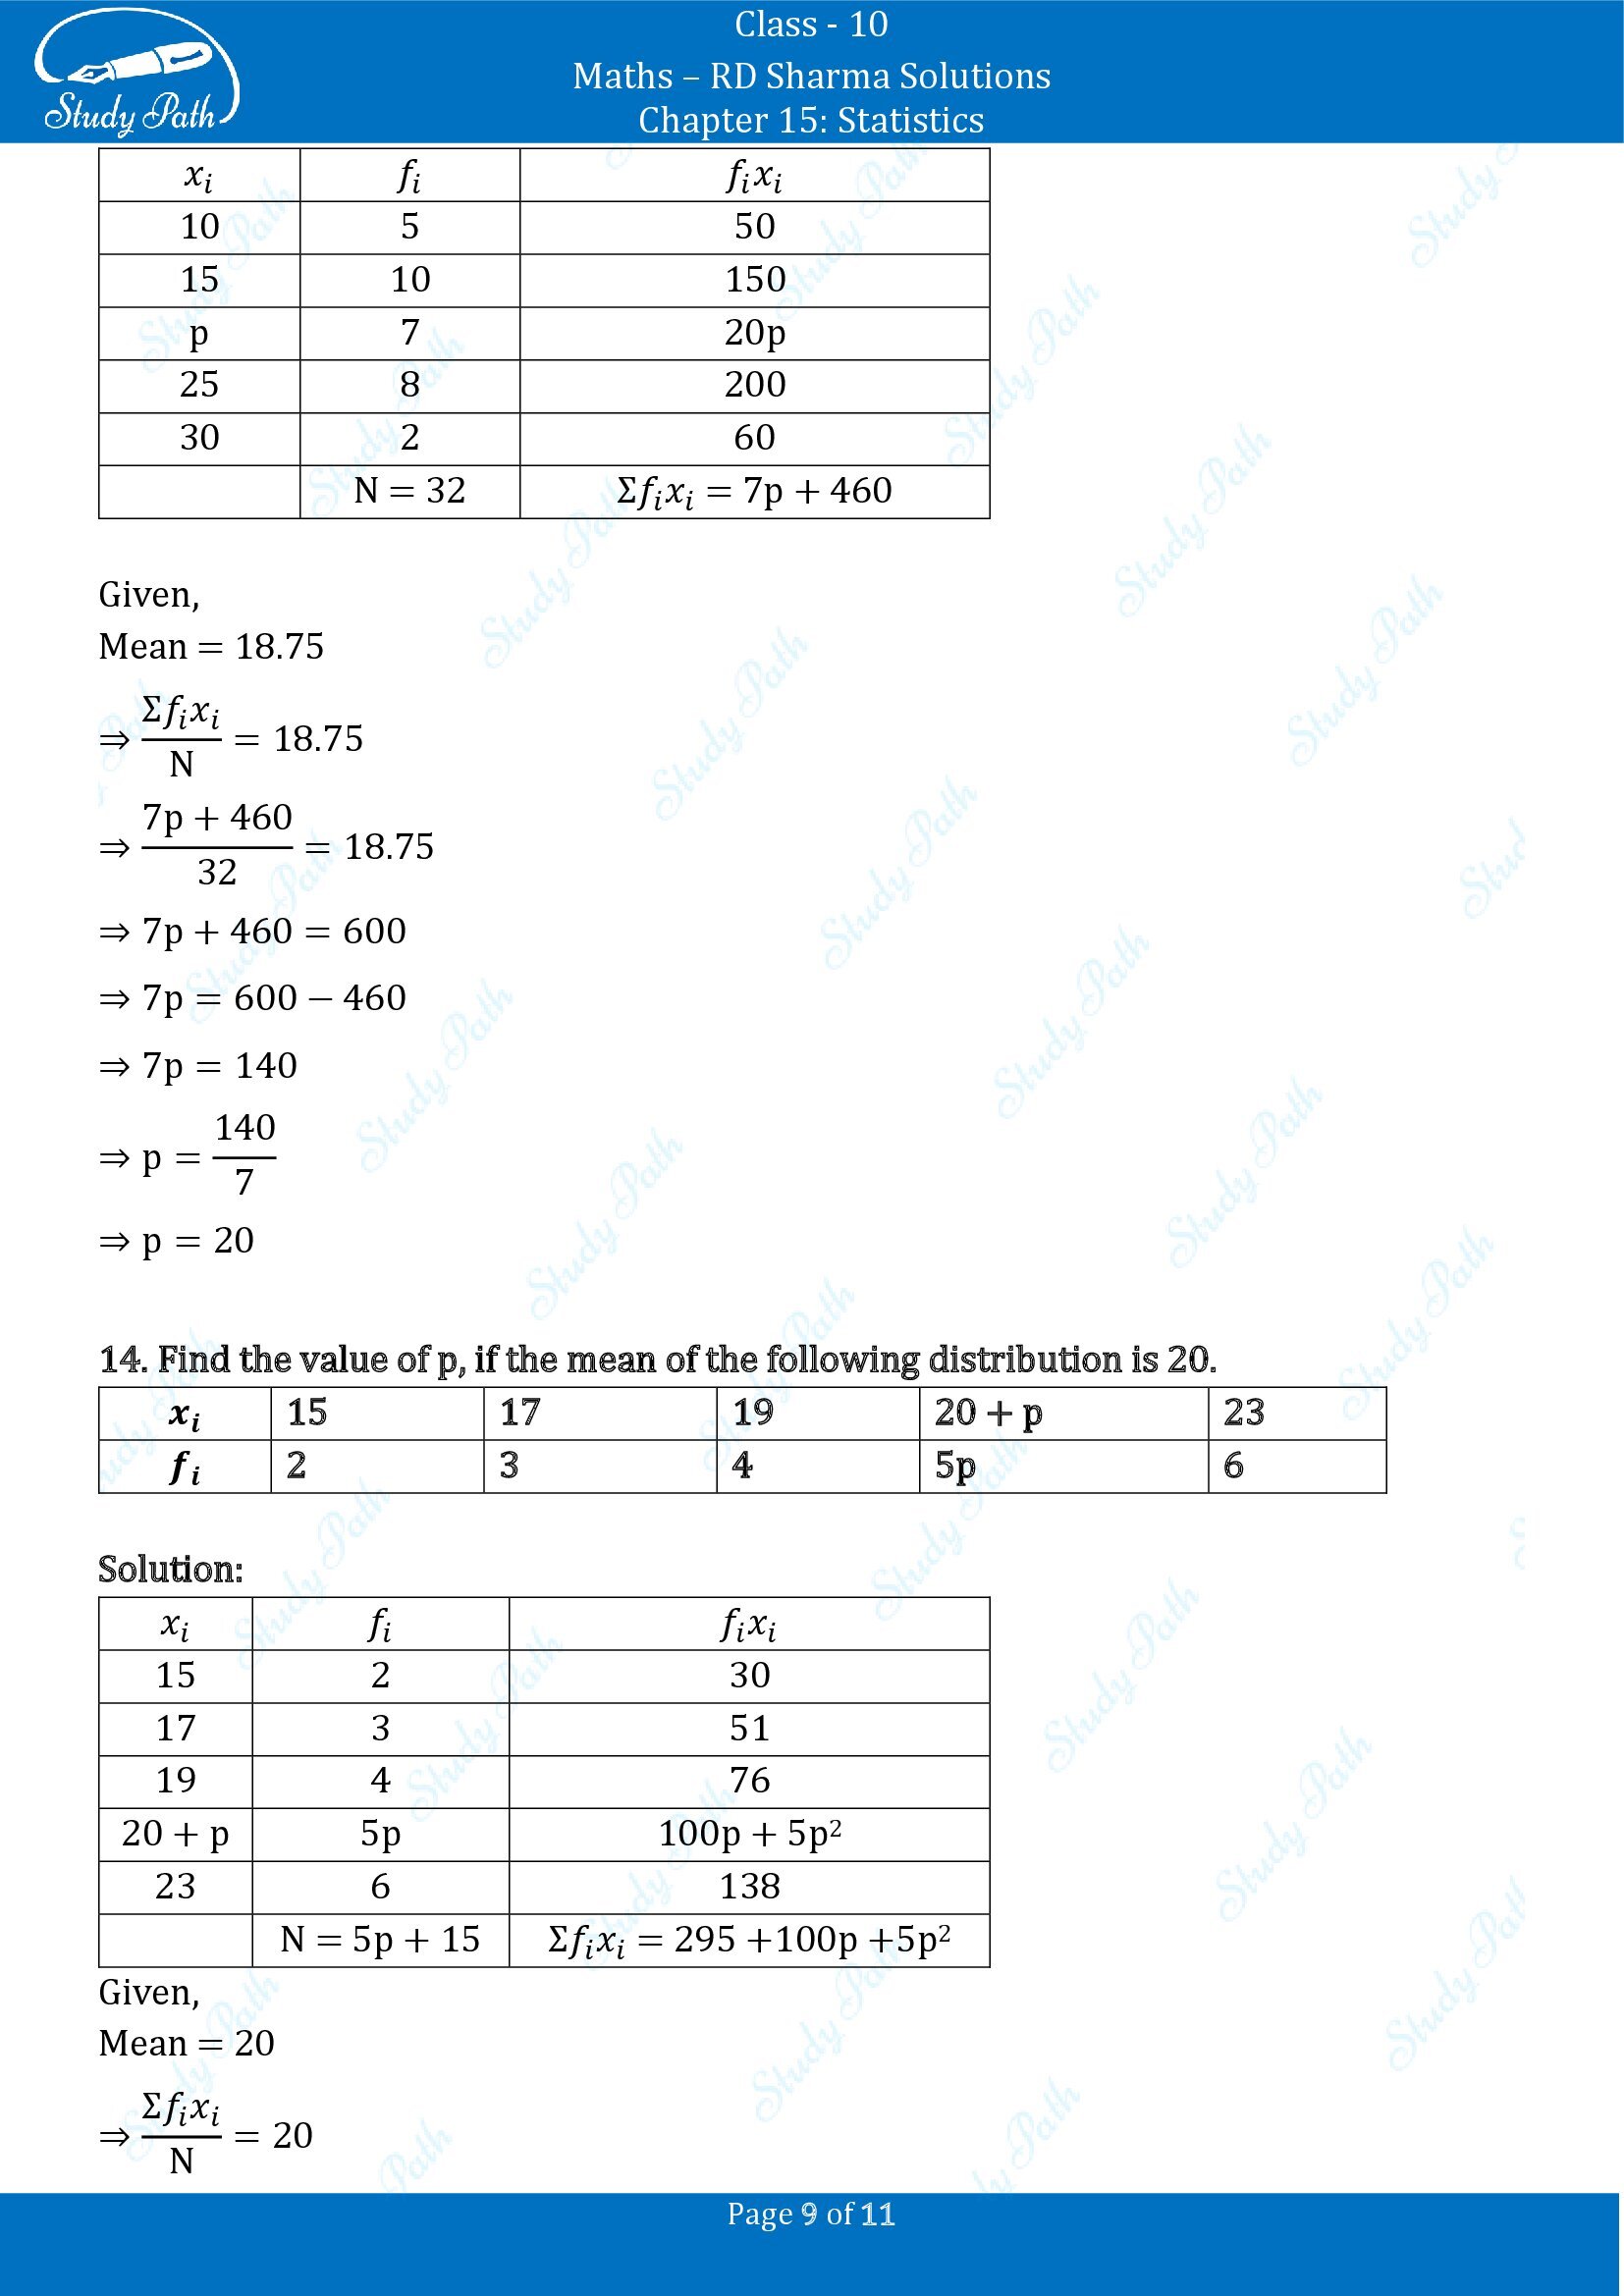 RD Sharma Solutions Class 10 Chapter 15 Statistics Exercise 15.1 00009